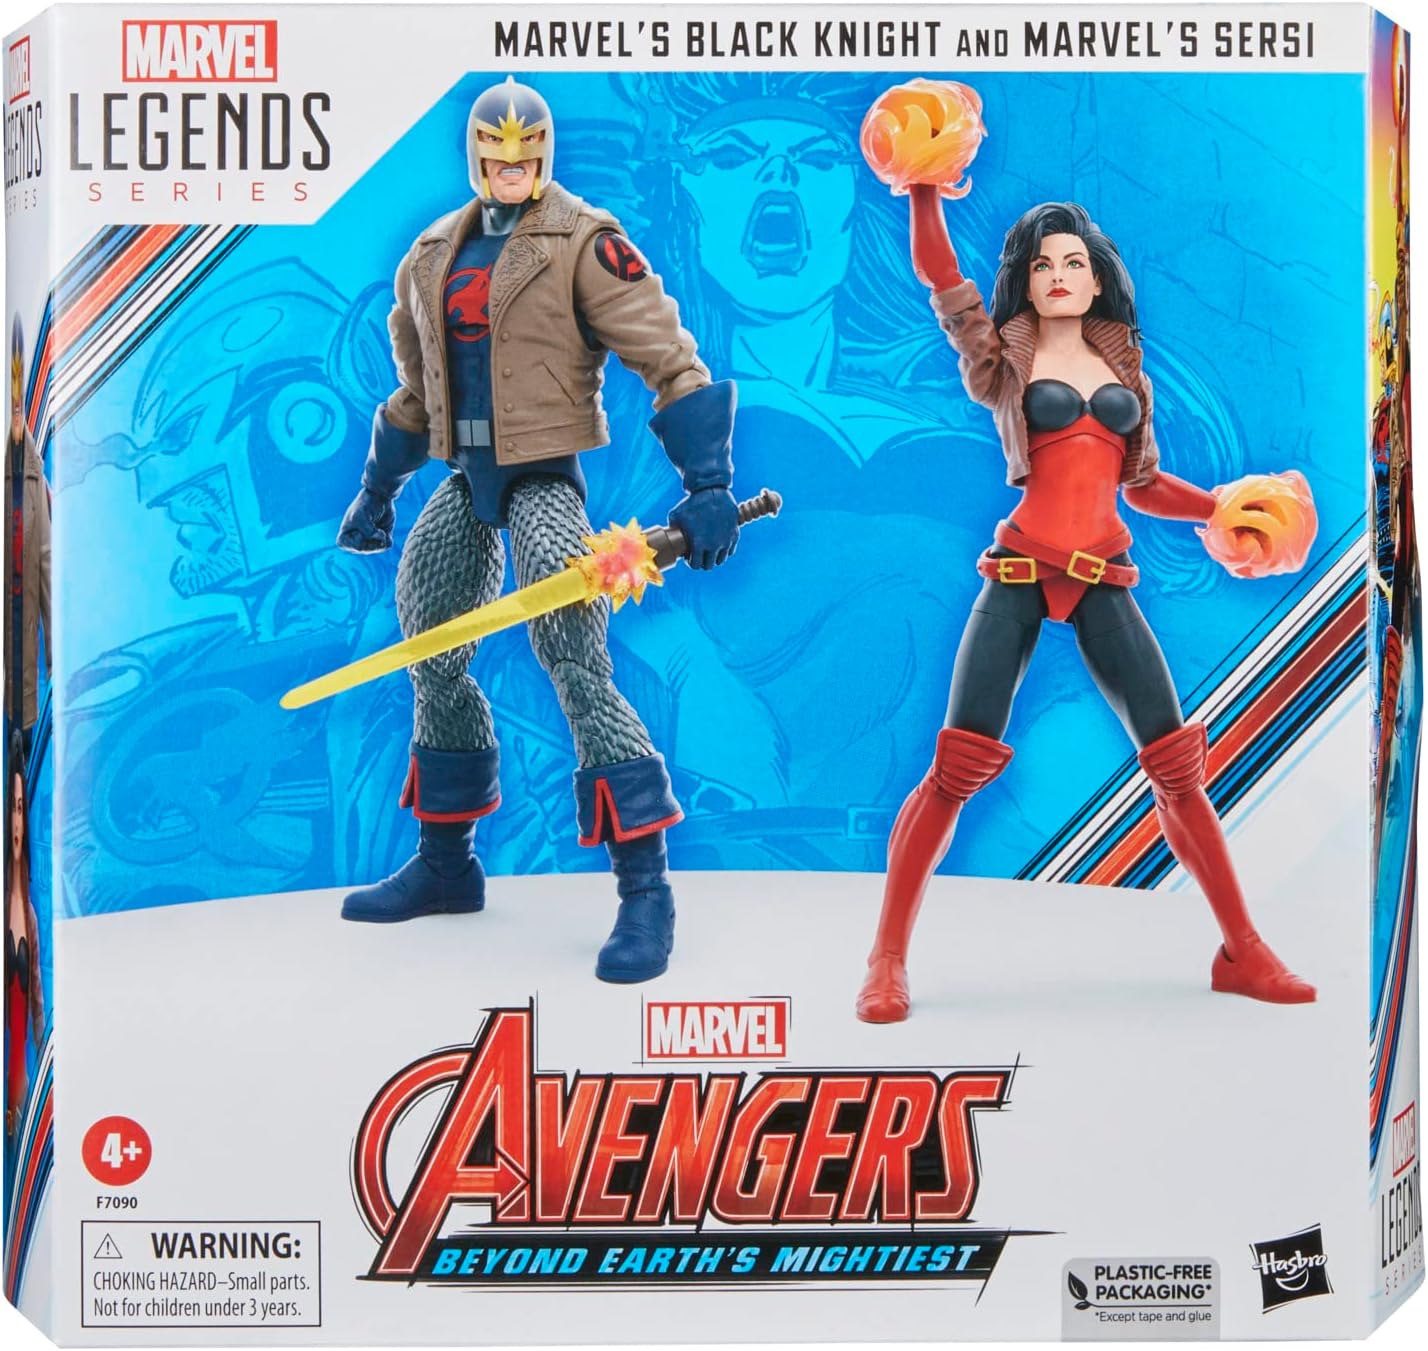 Legends Series Black Knight & 's Sersi, Avengers 60th Anniversary Collectible 6-Inch Action Figures (Amazon Exclusive)